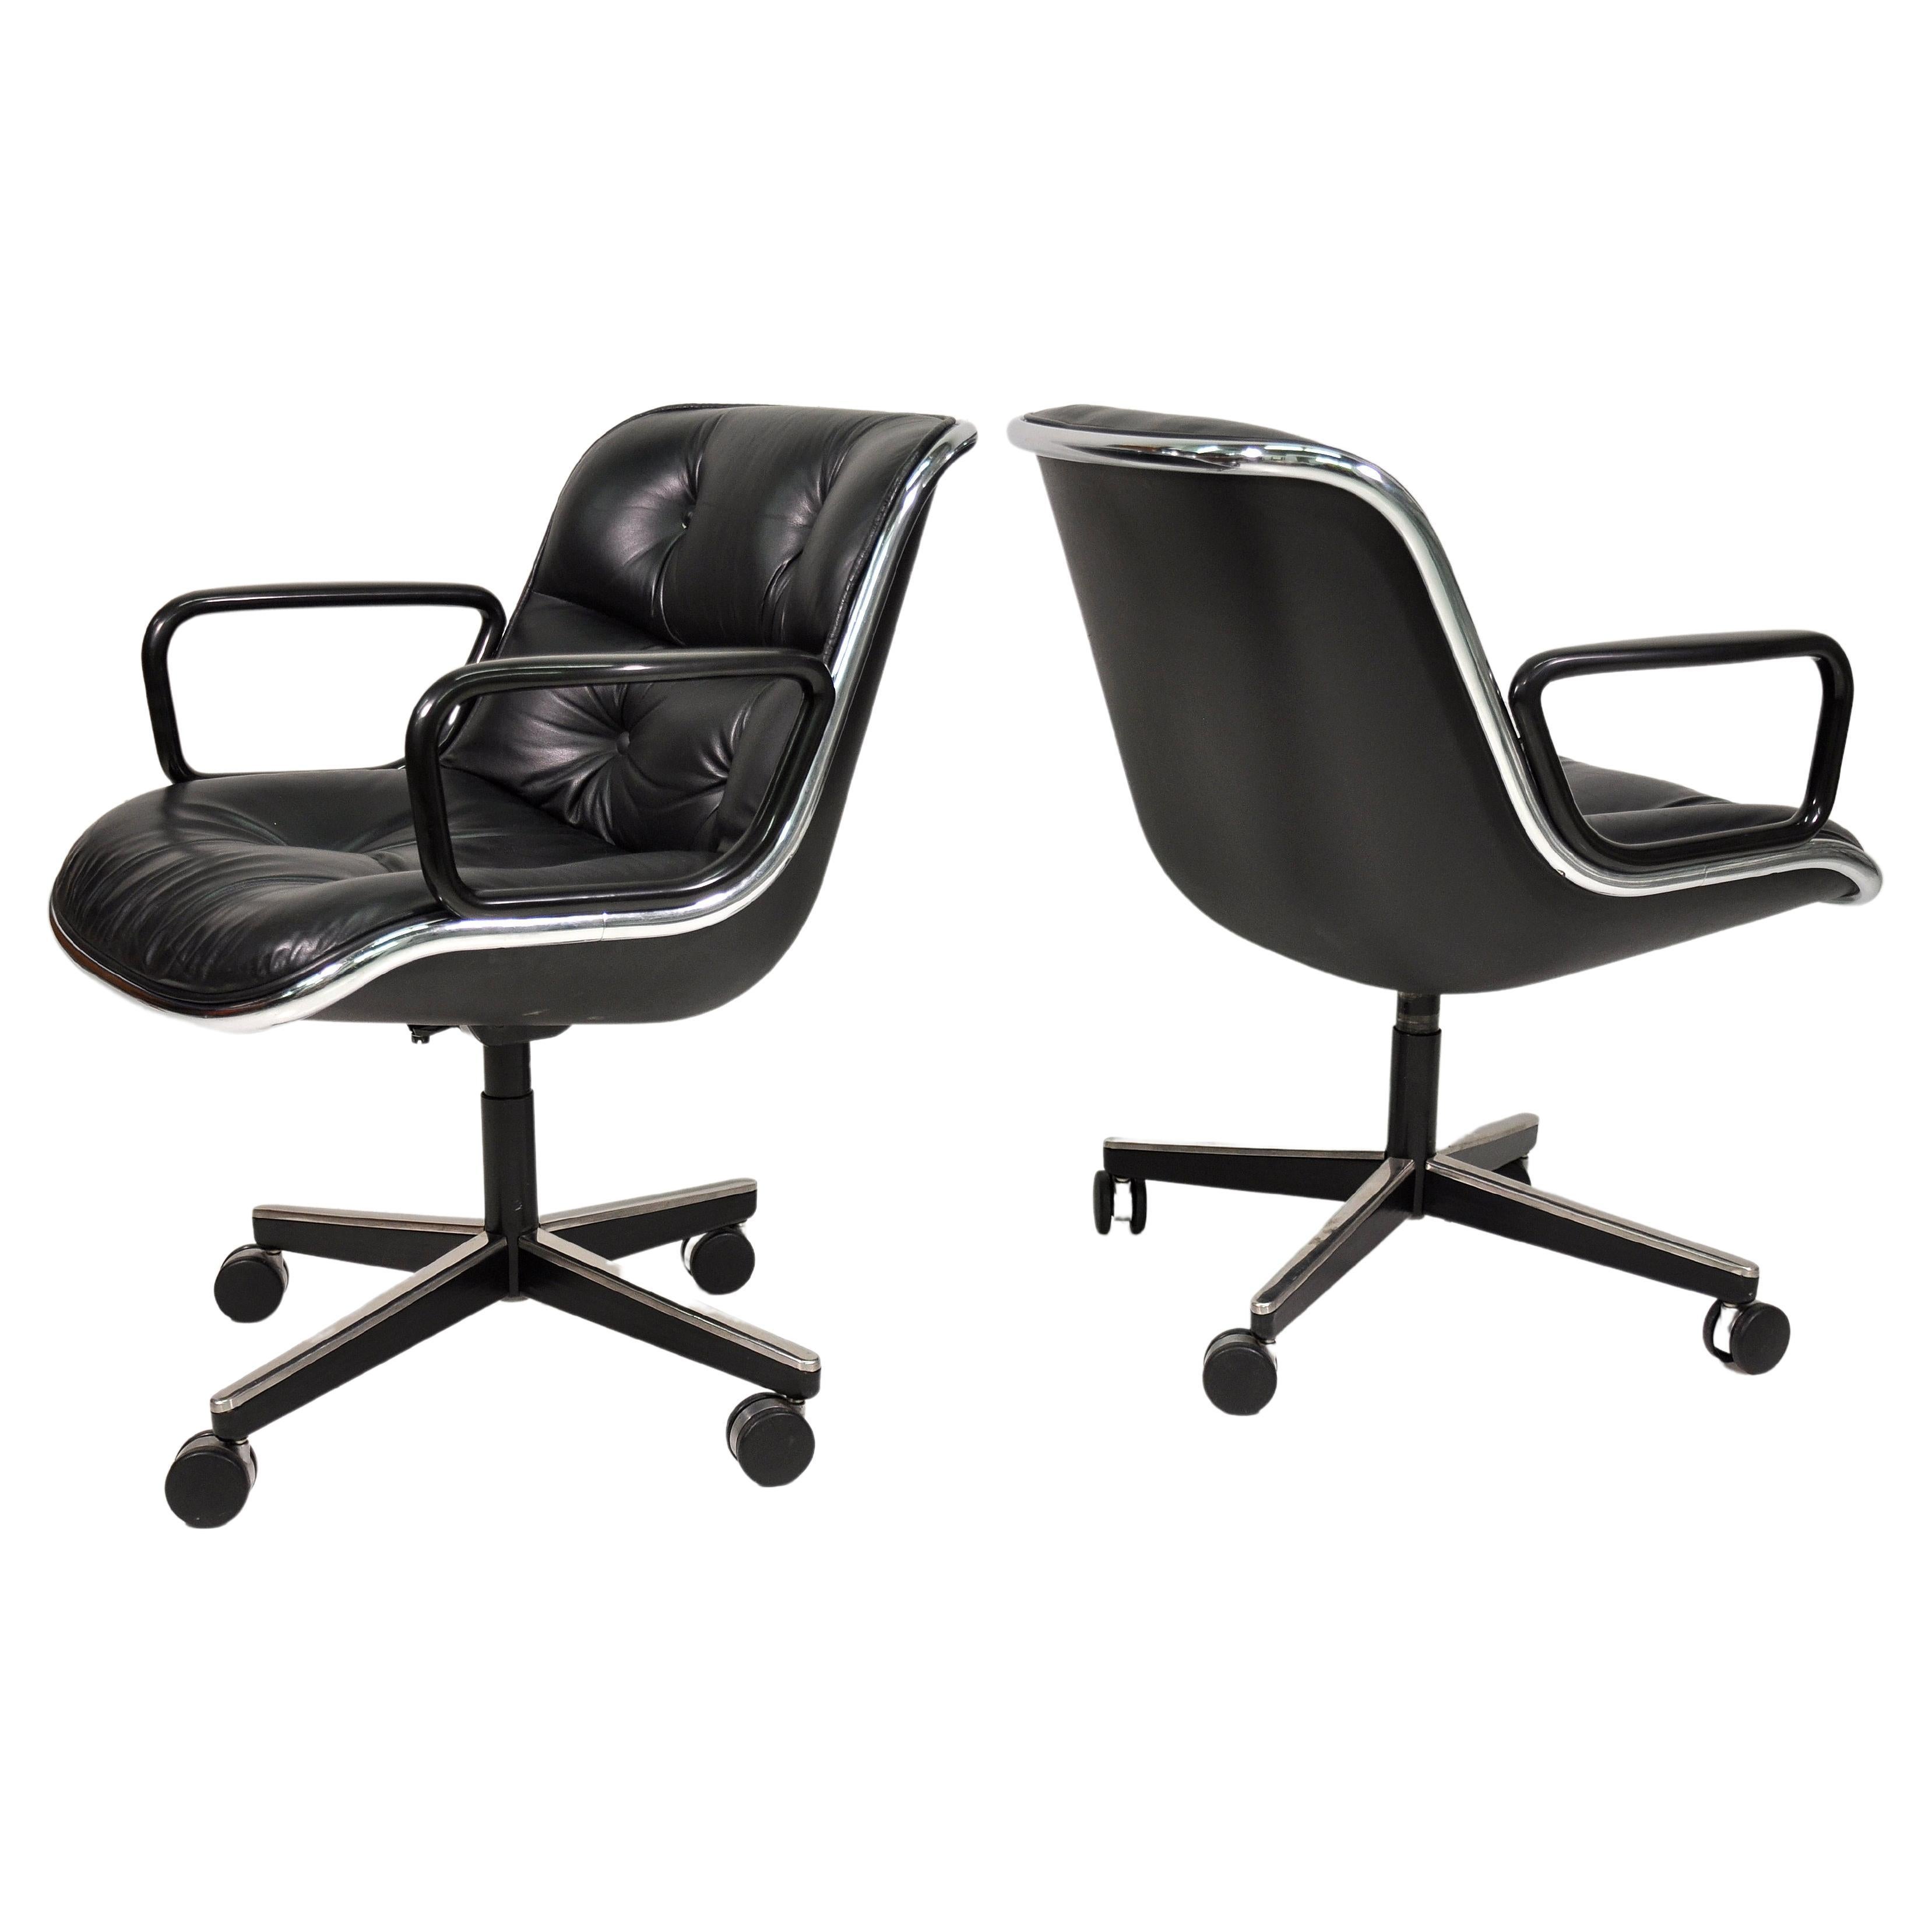 Black Leather Executive Desk Chairs by Charles Pollock for Knoll